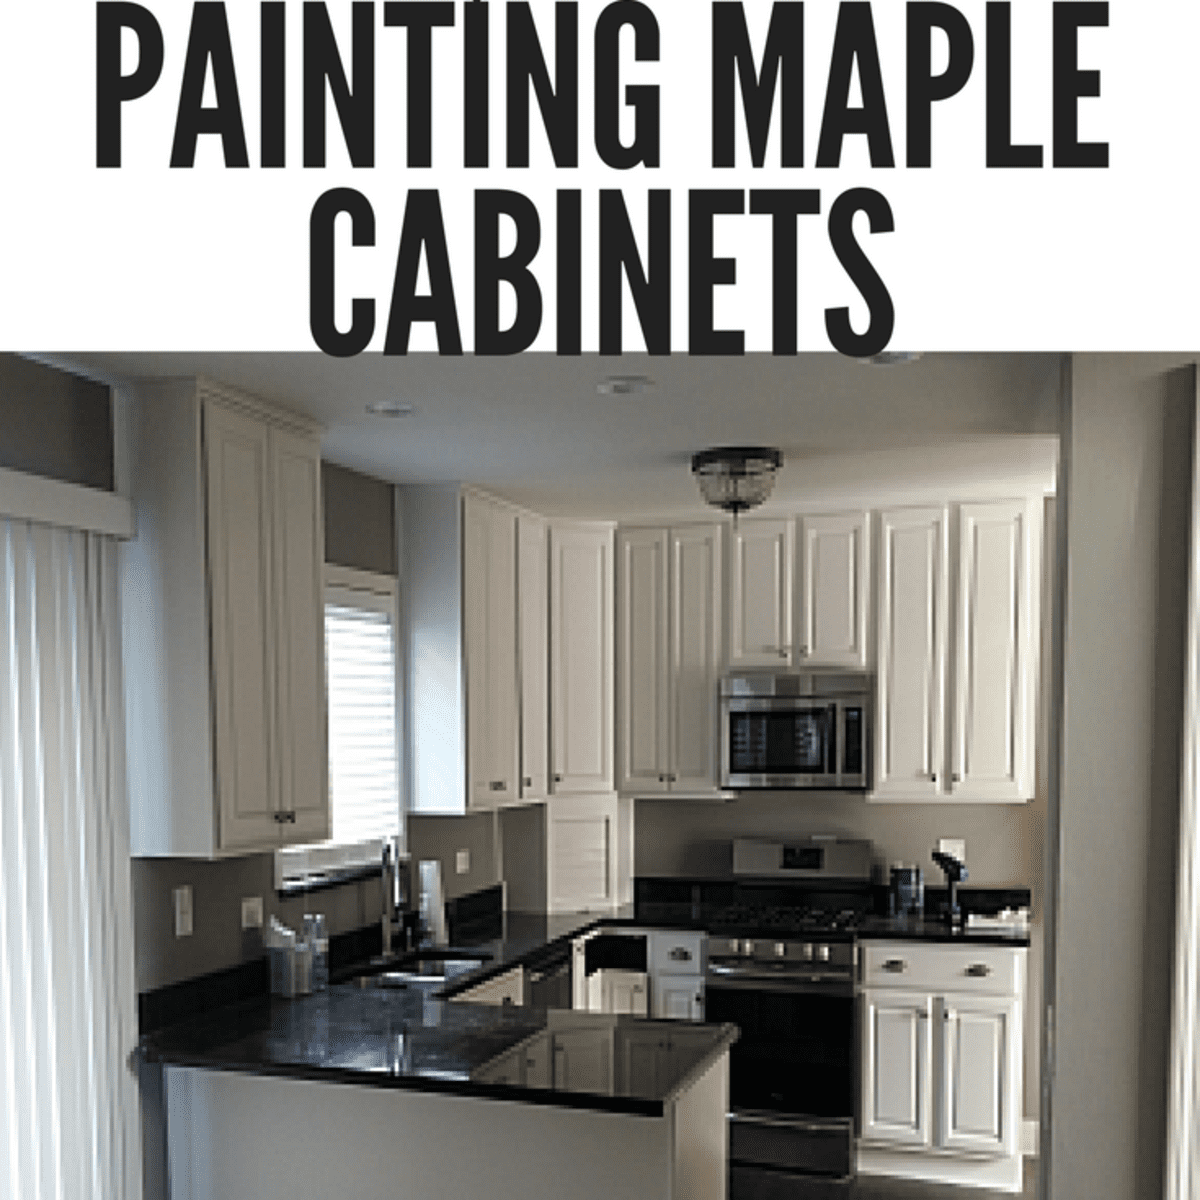 How To Paint Maple Cabinets Tips From, Can You Paint Birch Cabinets